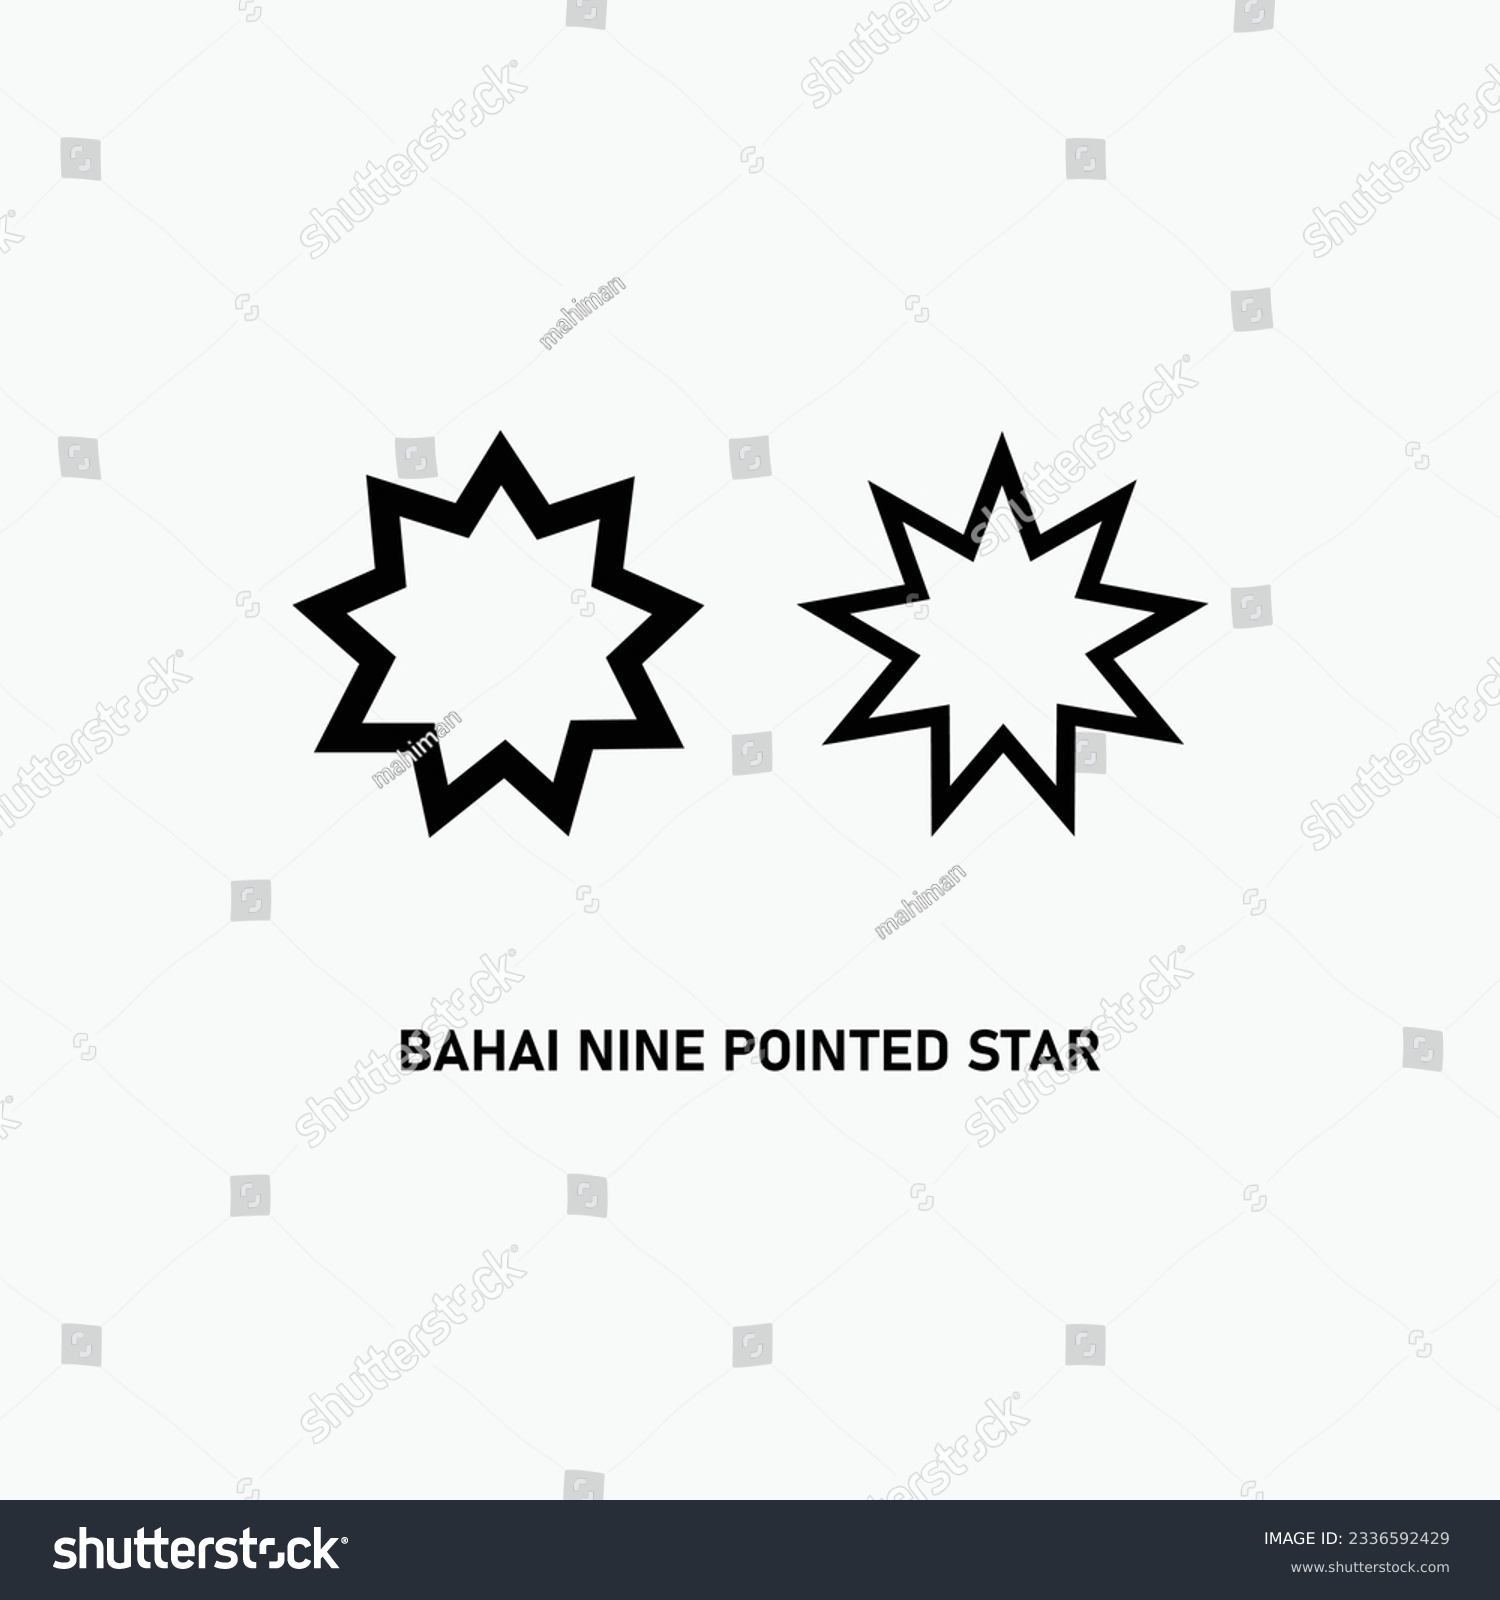 SVG of Religious Icon Set Collection Illustration. Symbolic Representation Of Bahai 9 Point Star svg